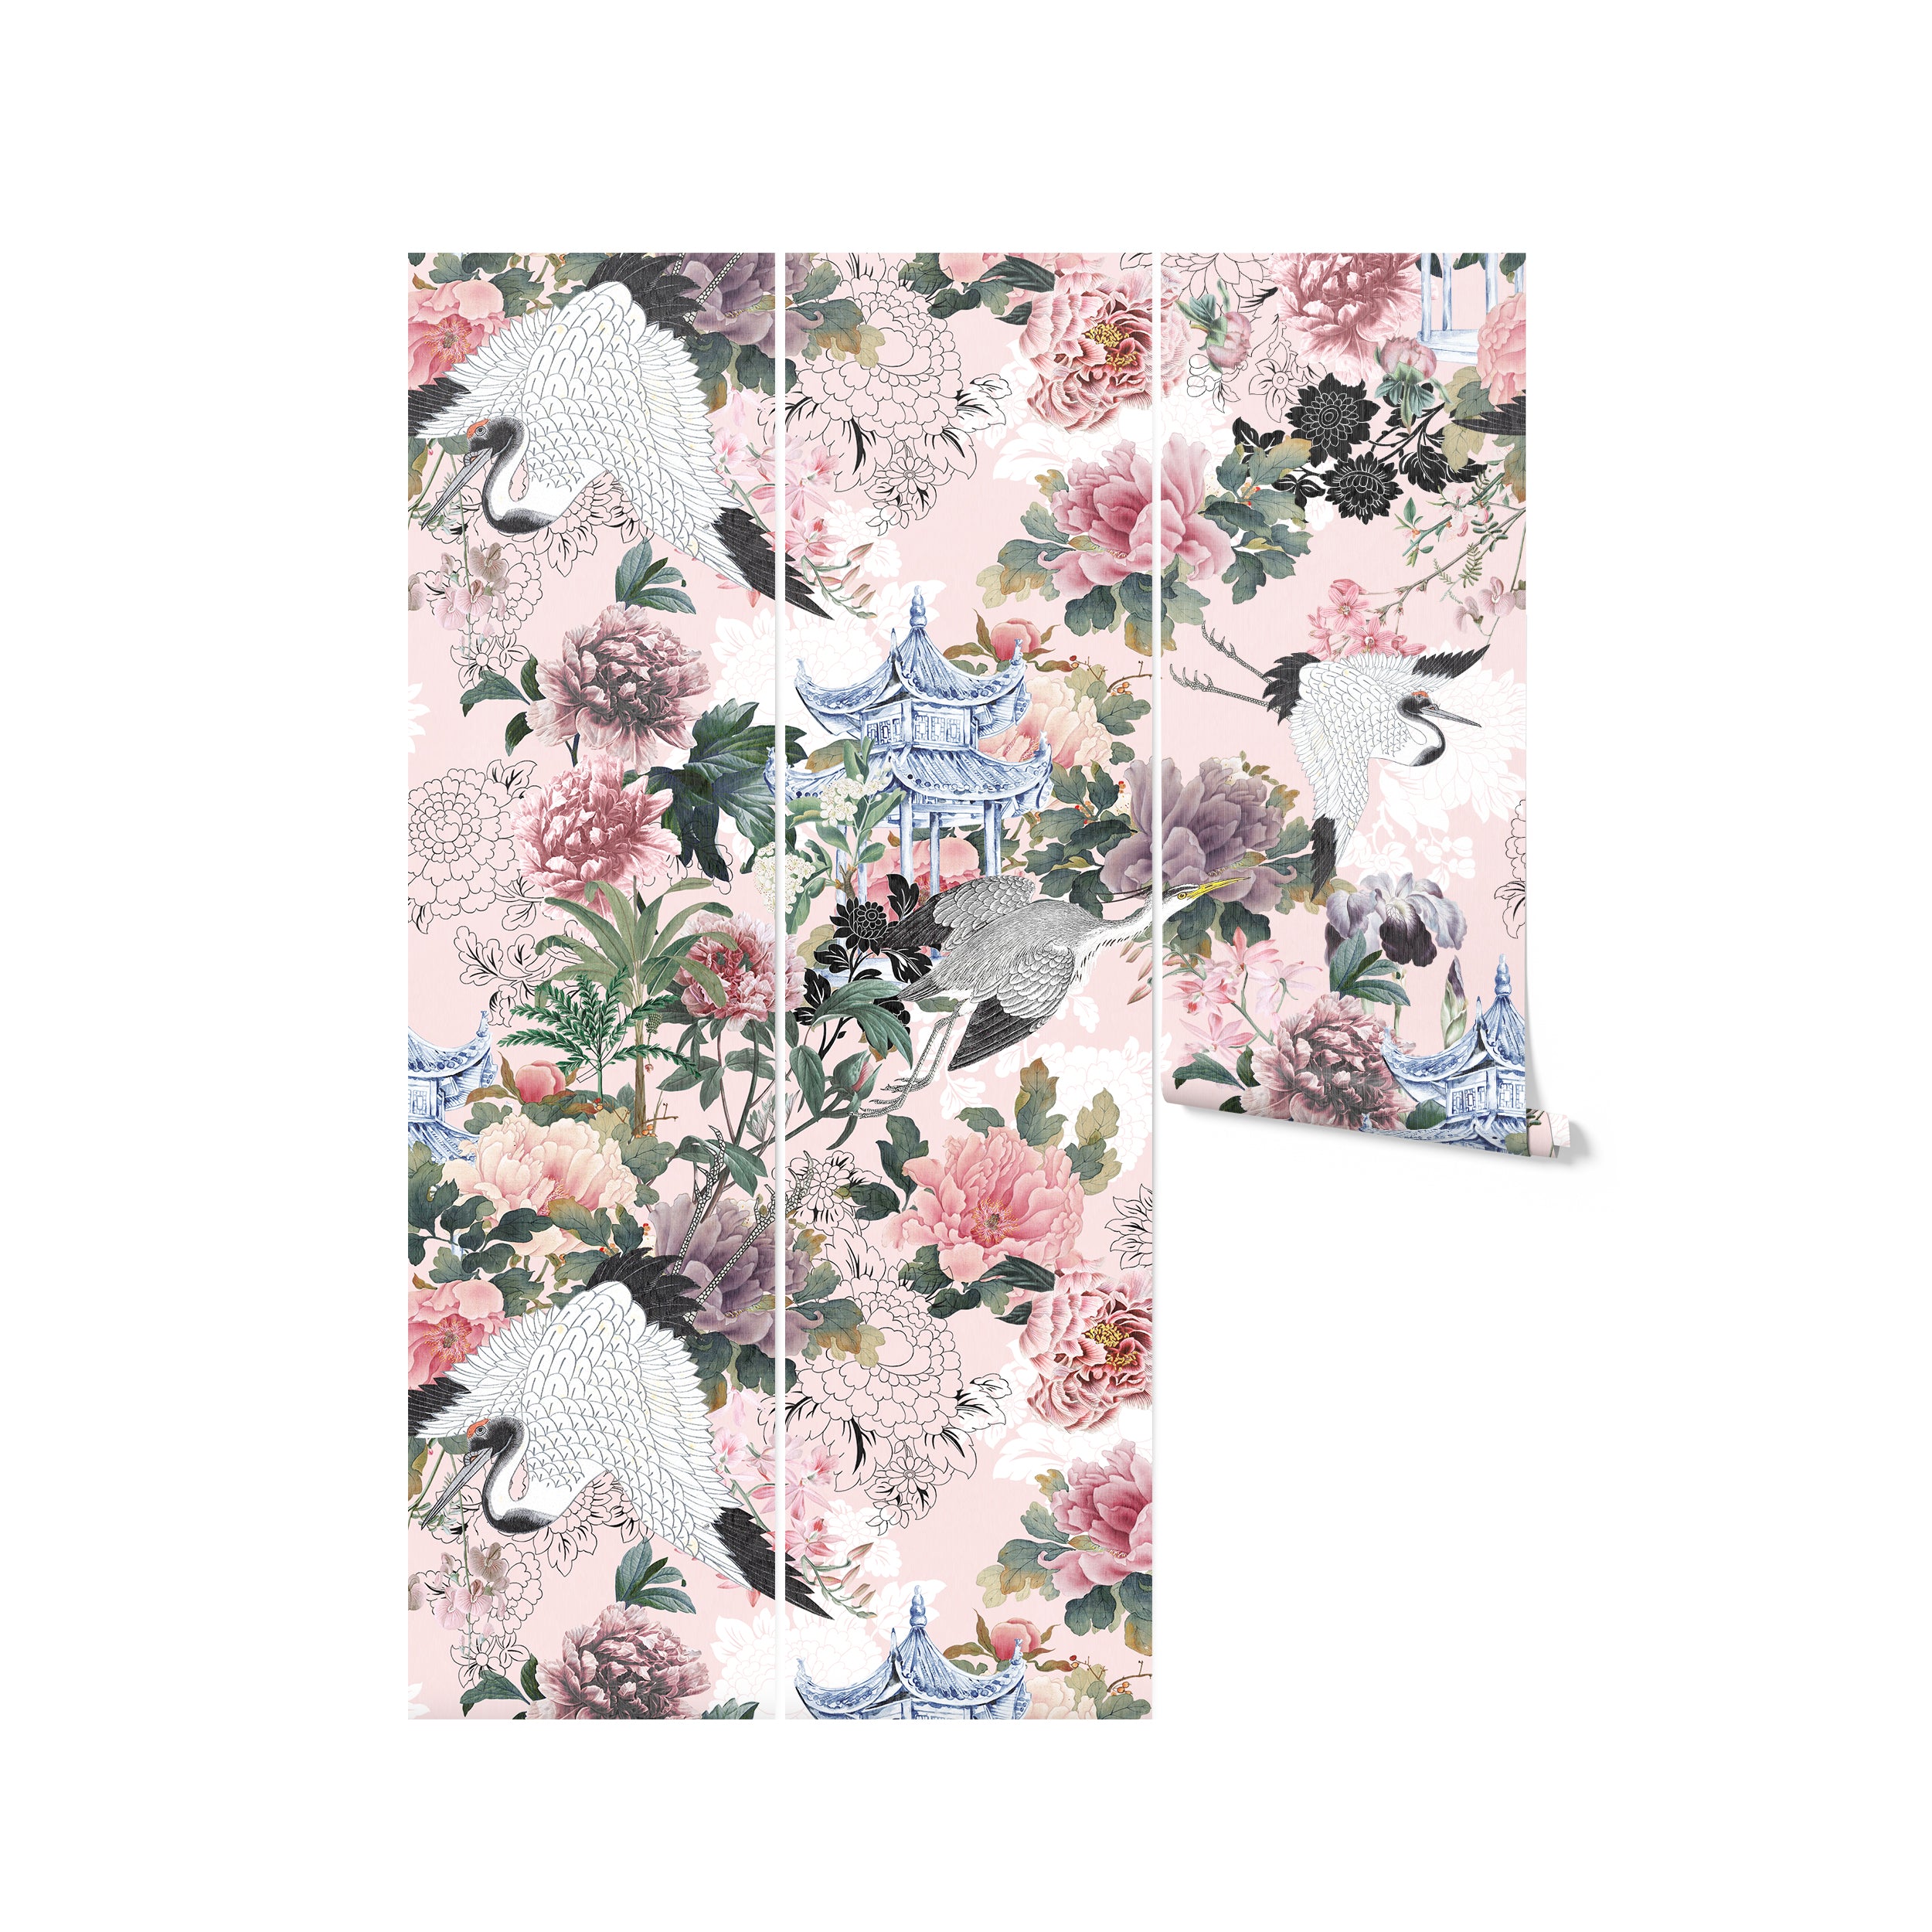 Roll of Pink Kyoto Dreams Wallpaper showcasing the intricate design with flowers, birds, and architectural elements in a harmonious pink and gray palette, perfect for adding a sophisticated and cultural flair to any room.